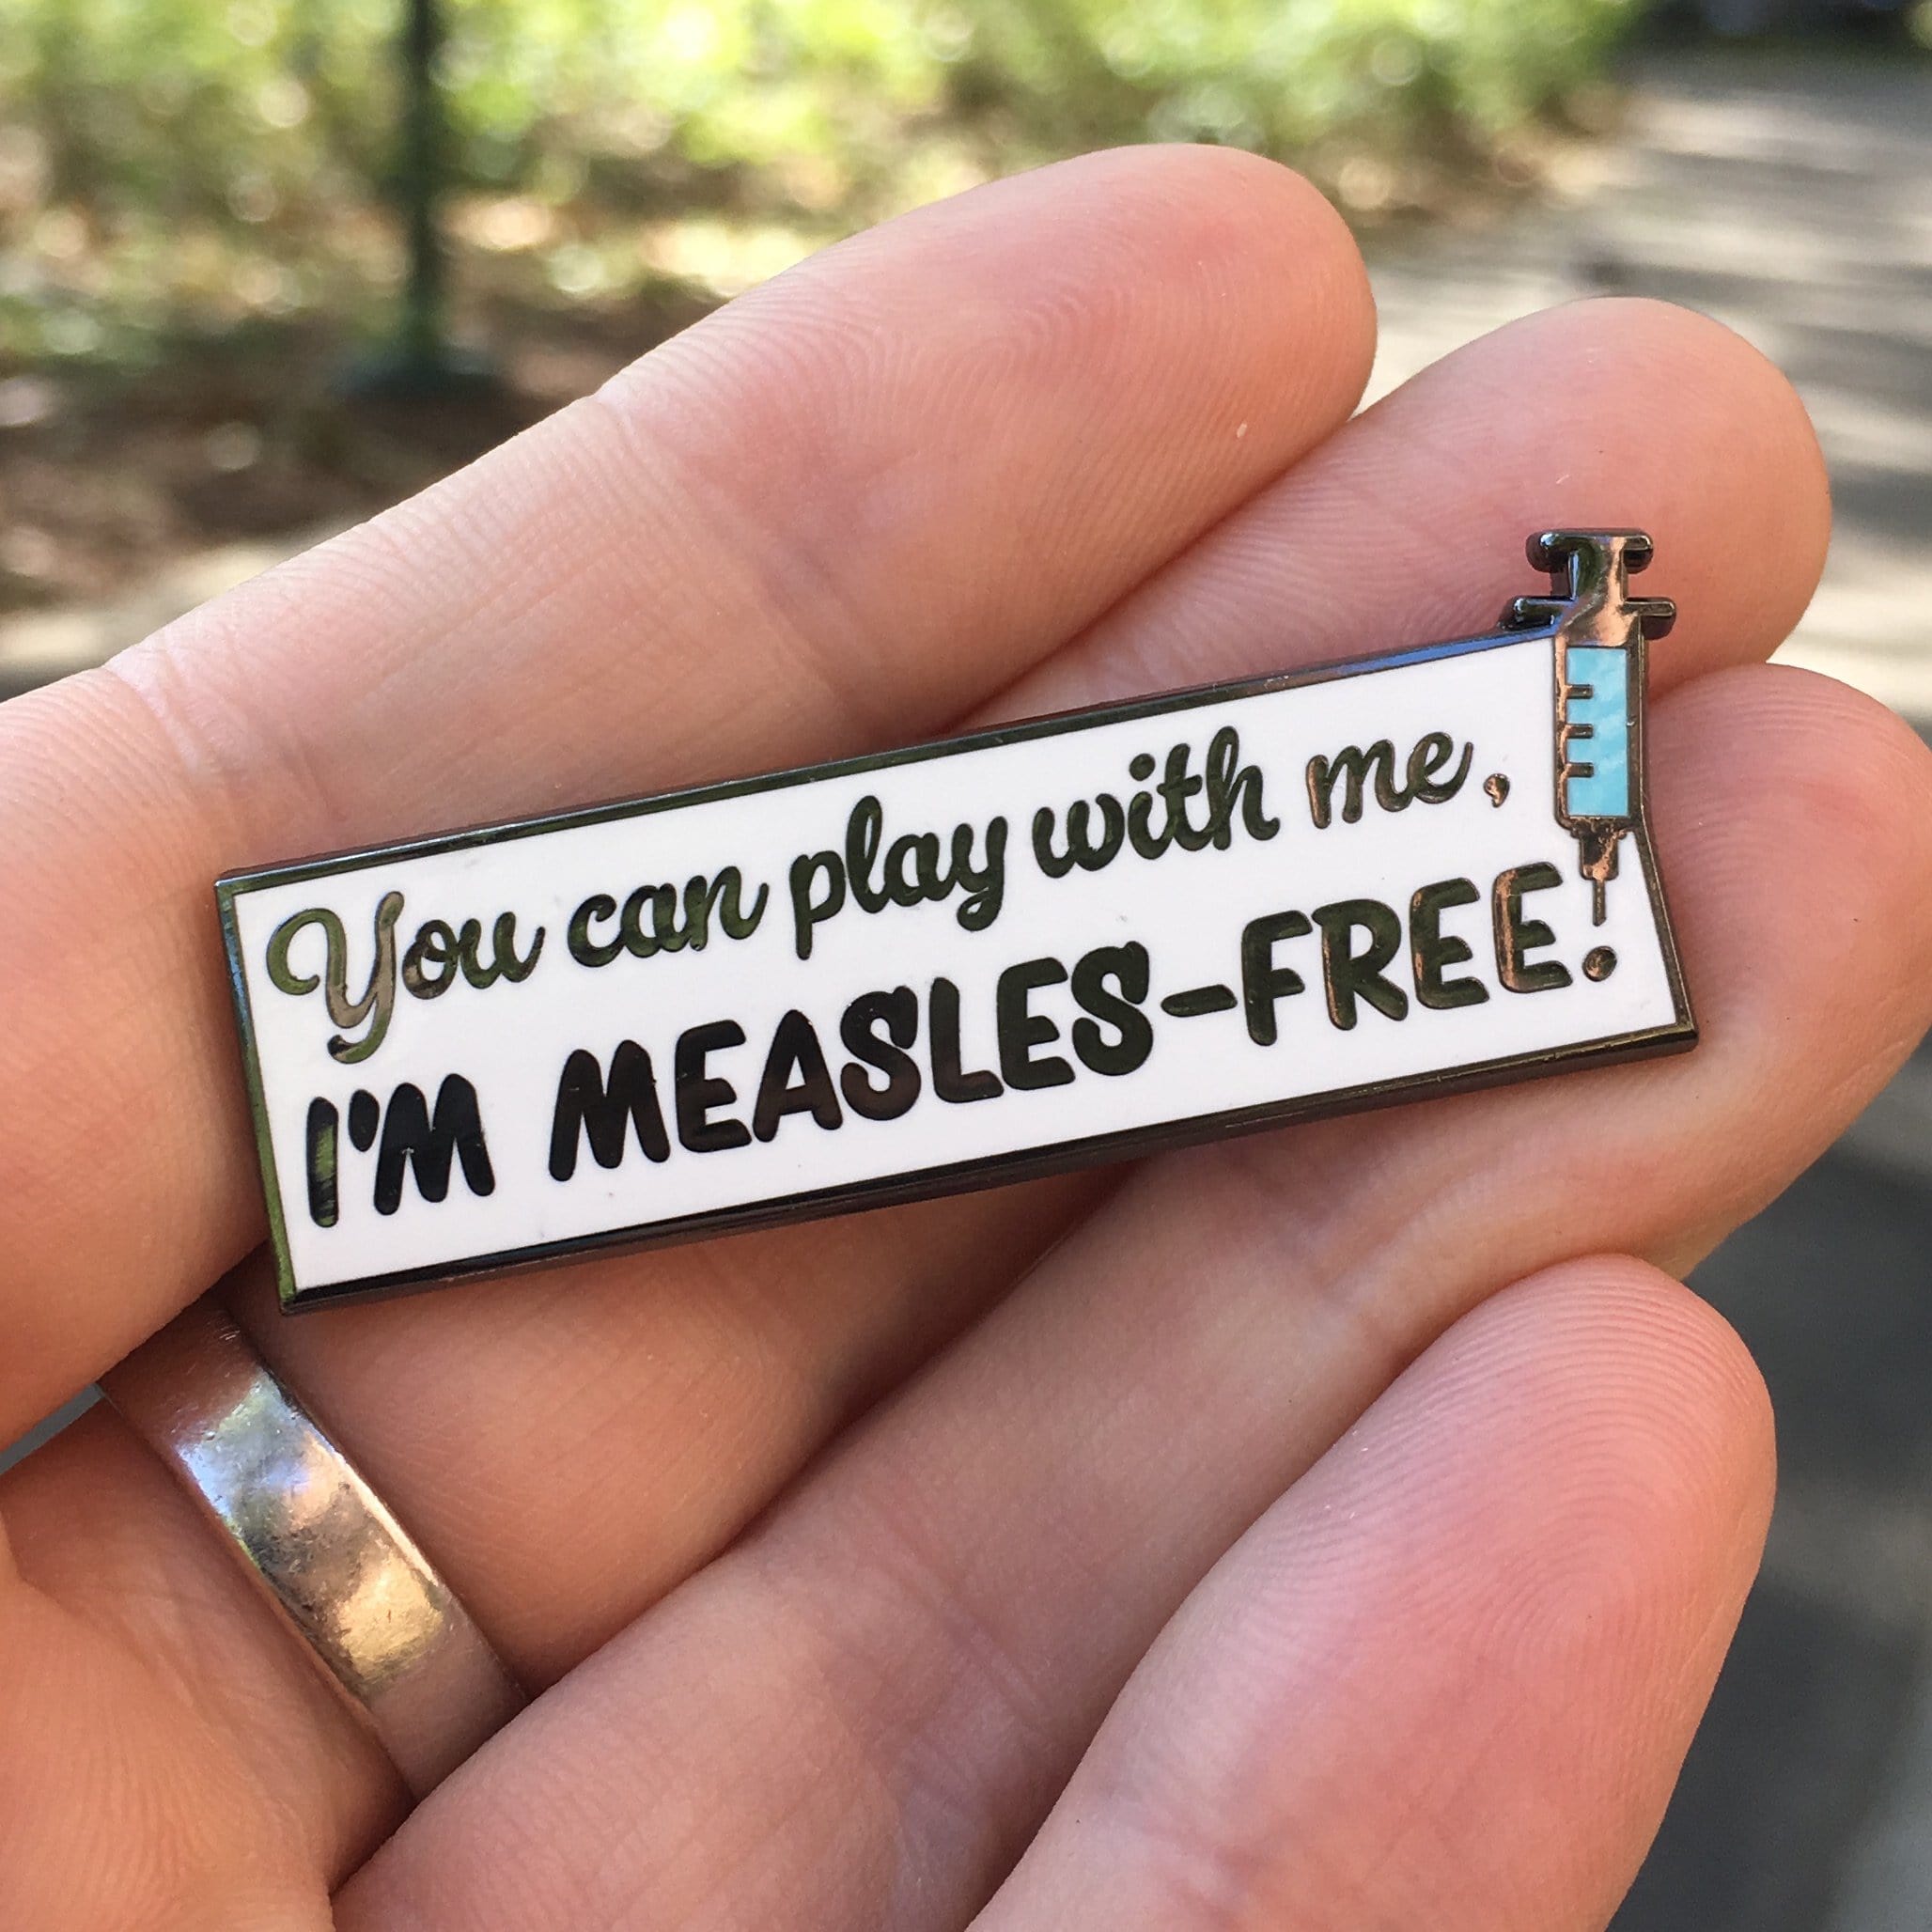 You can play with me, I'm measles-free Pin